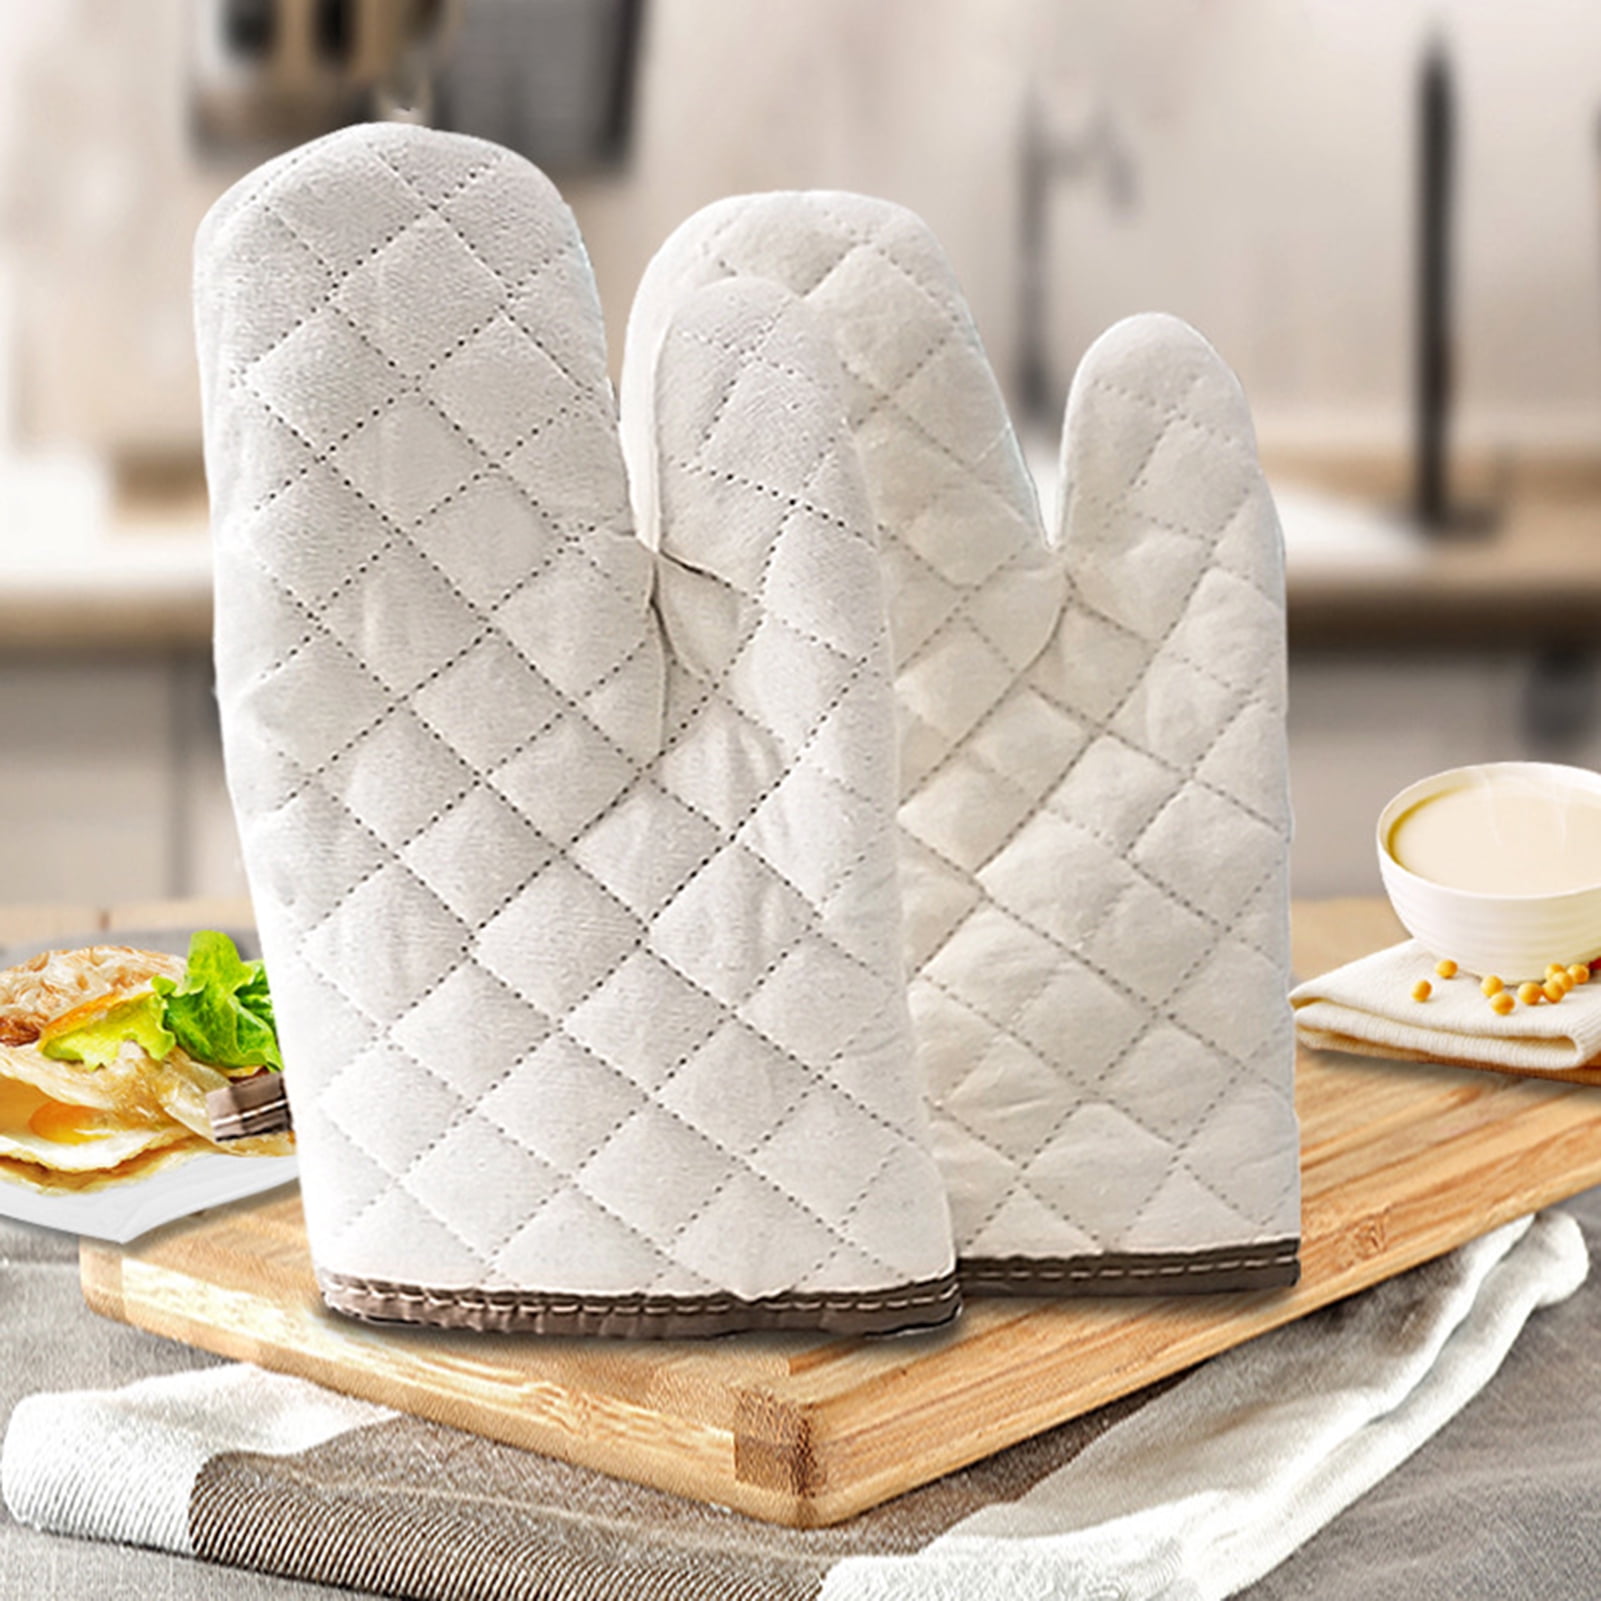 Travelwant 1 Pair Heat Resistant Thick Cotton Oven Mitts, Soft Quilted lining, Durable and Flexible Gloves, Protect Hands from Hot Kitchen Surfaces